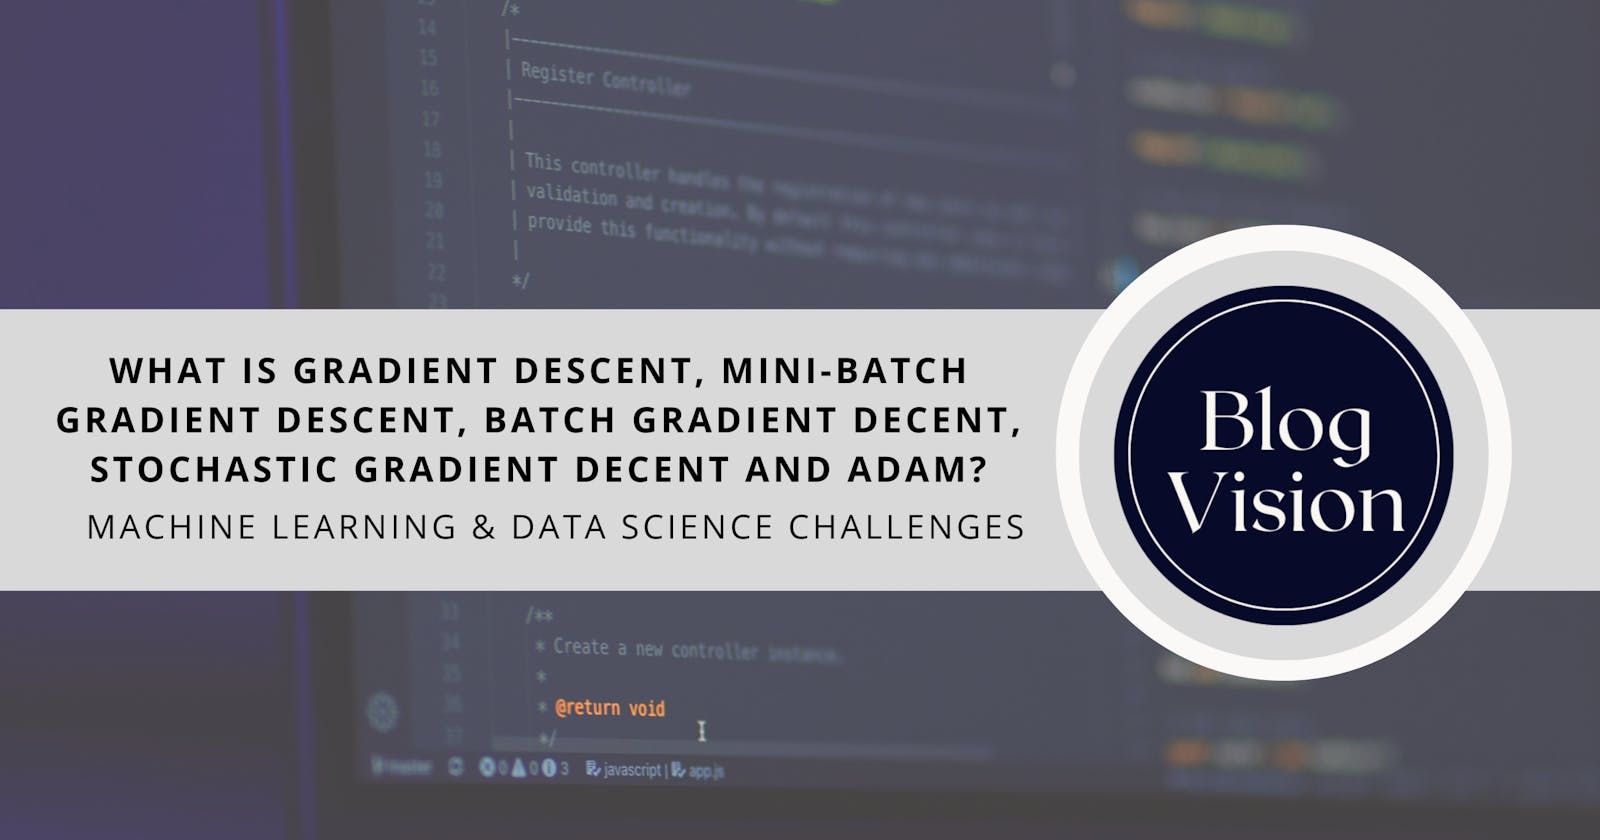 #61 Machine Learning & Data Science Challenge 61